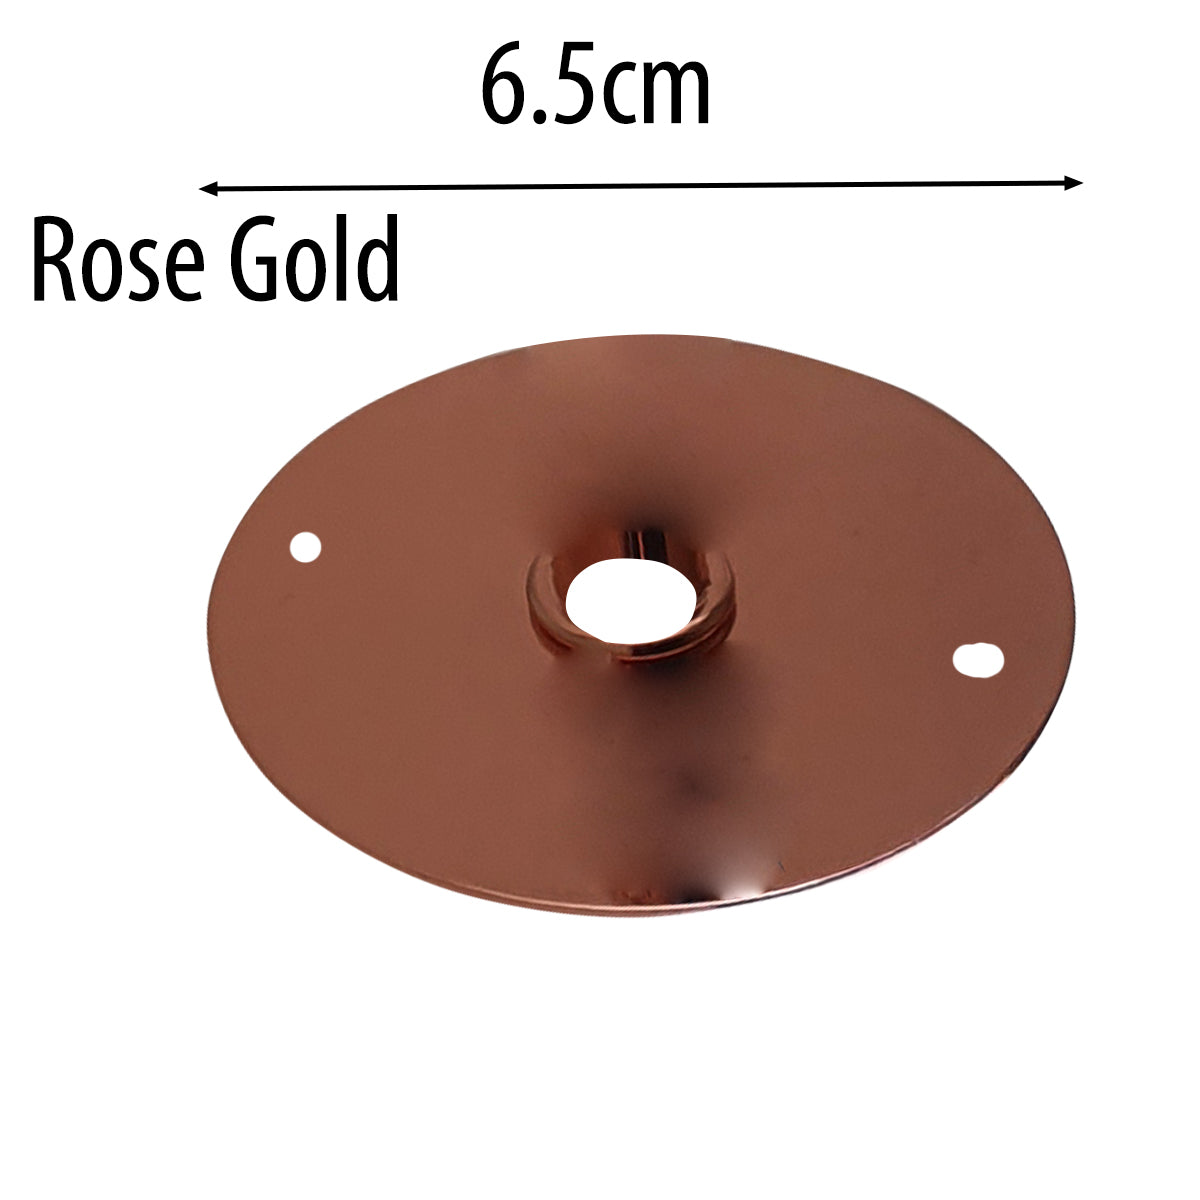 6.5cm Satin Nickel Colour Front Fitting Ceiling Plate  ~1199